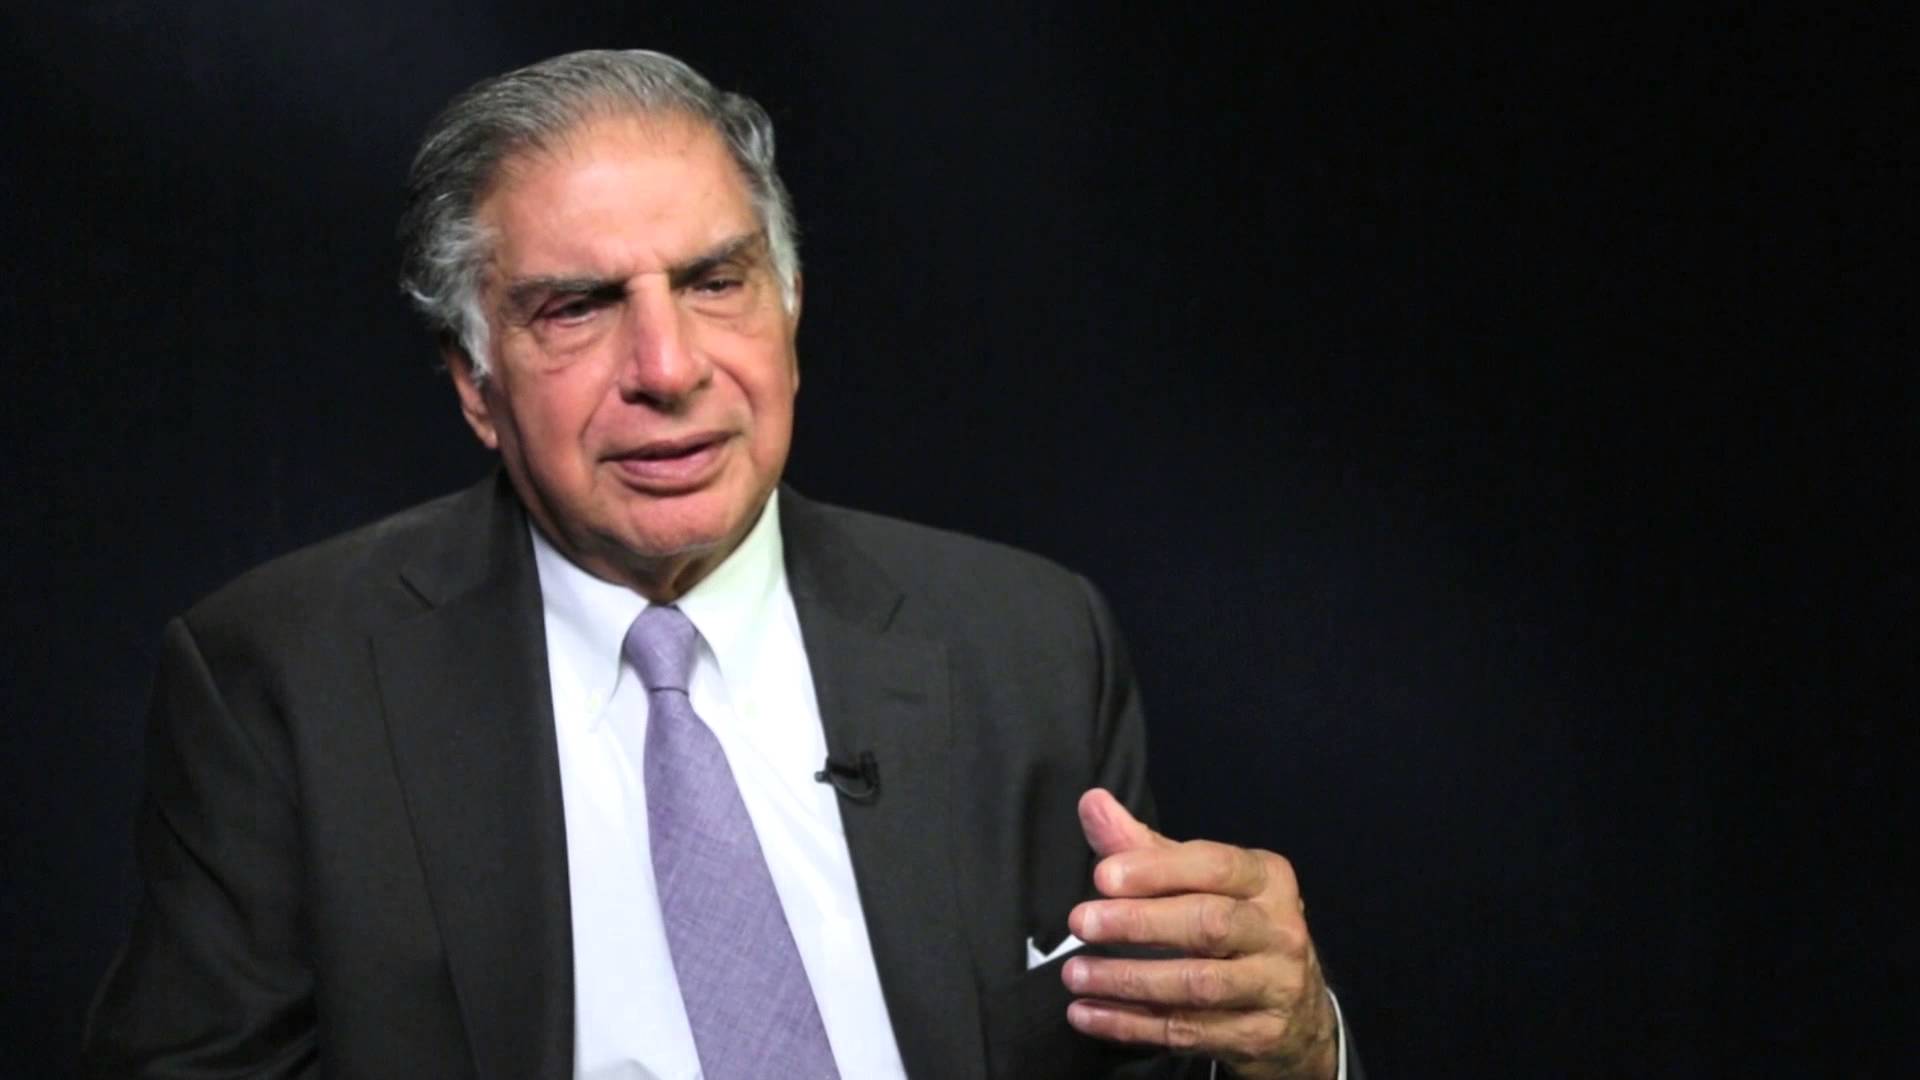 Jhunjhunwala will be remembered for his foresightedness, understanding of markets: Ratan Tata